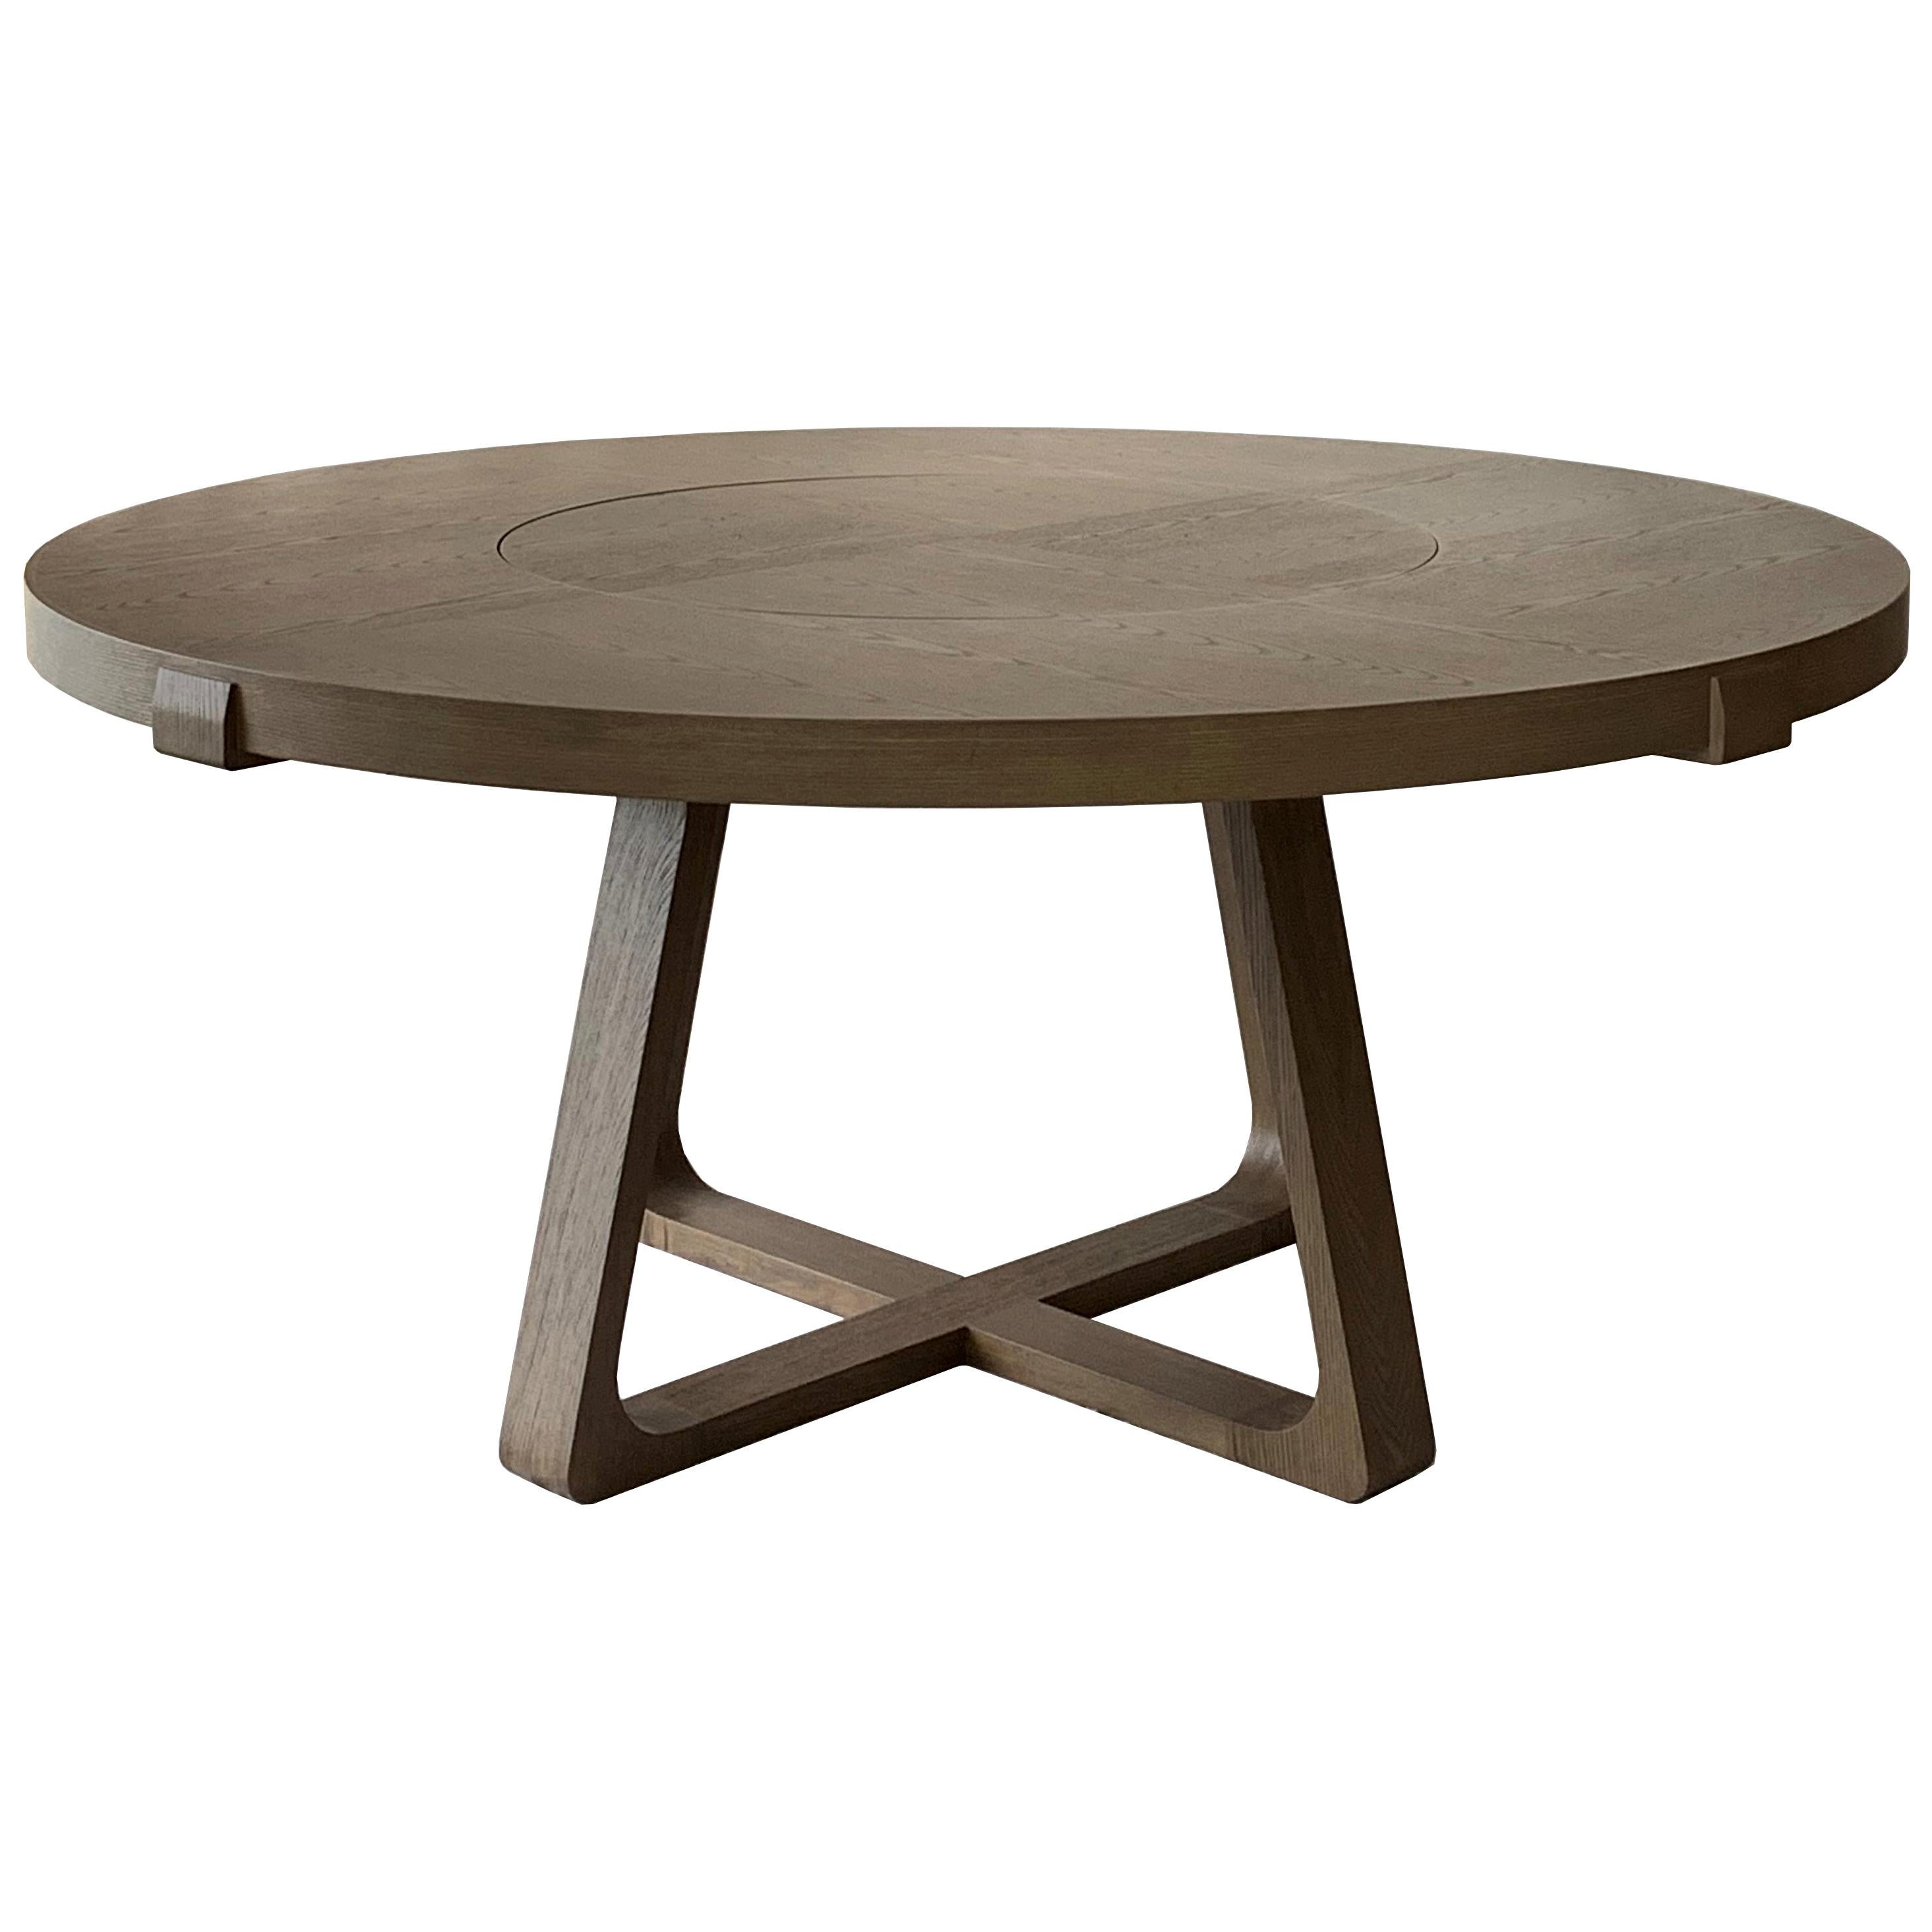 Round Dining Table With Lazy Susan 140cm Interlock André Fu Living Grey Oak New For Sale